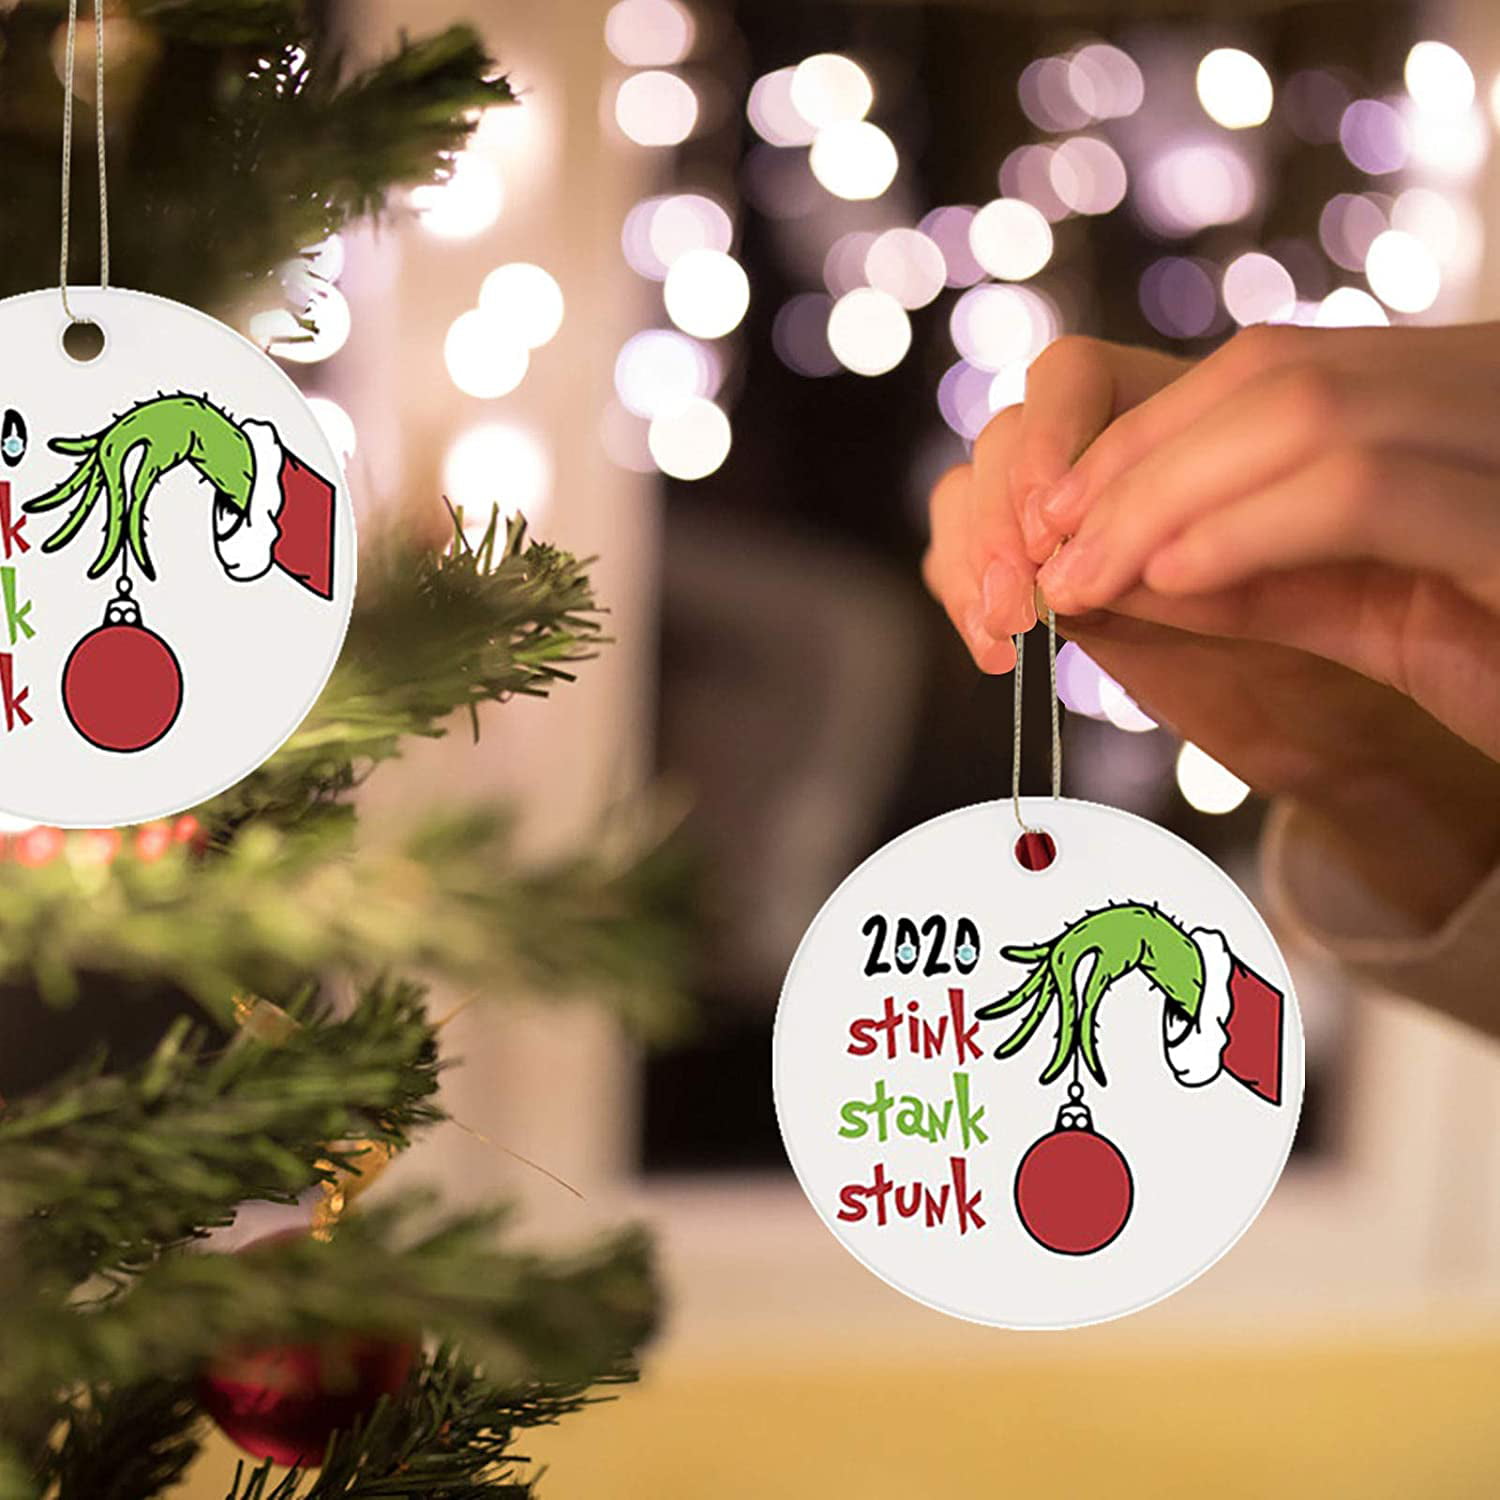 Details about   2020 Stink Stank Stunk Grinch Holding Mask Christmas Ornament/Magnet/DHM/Wall 